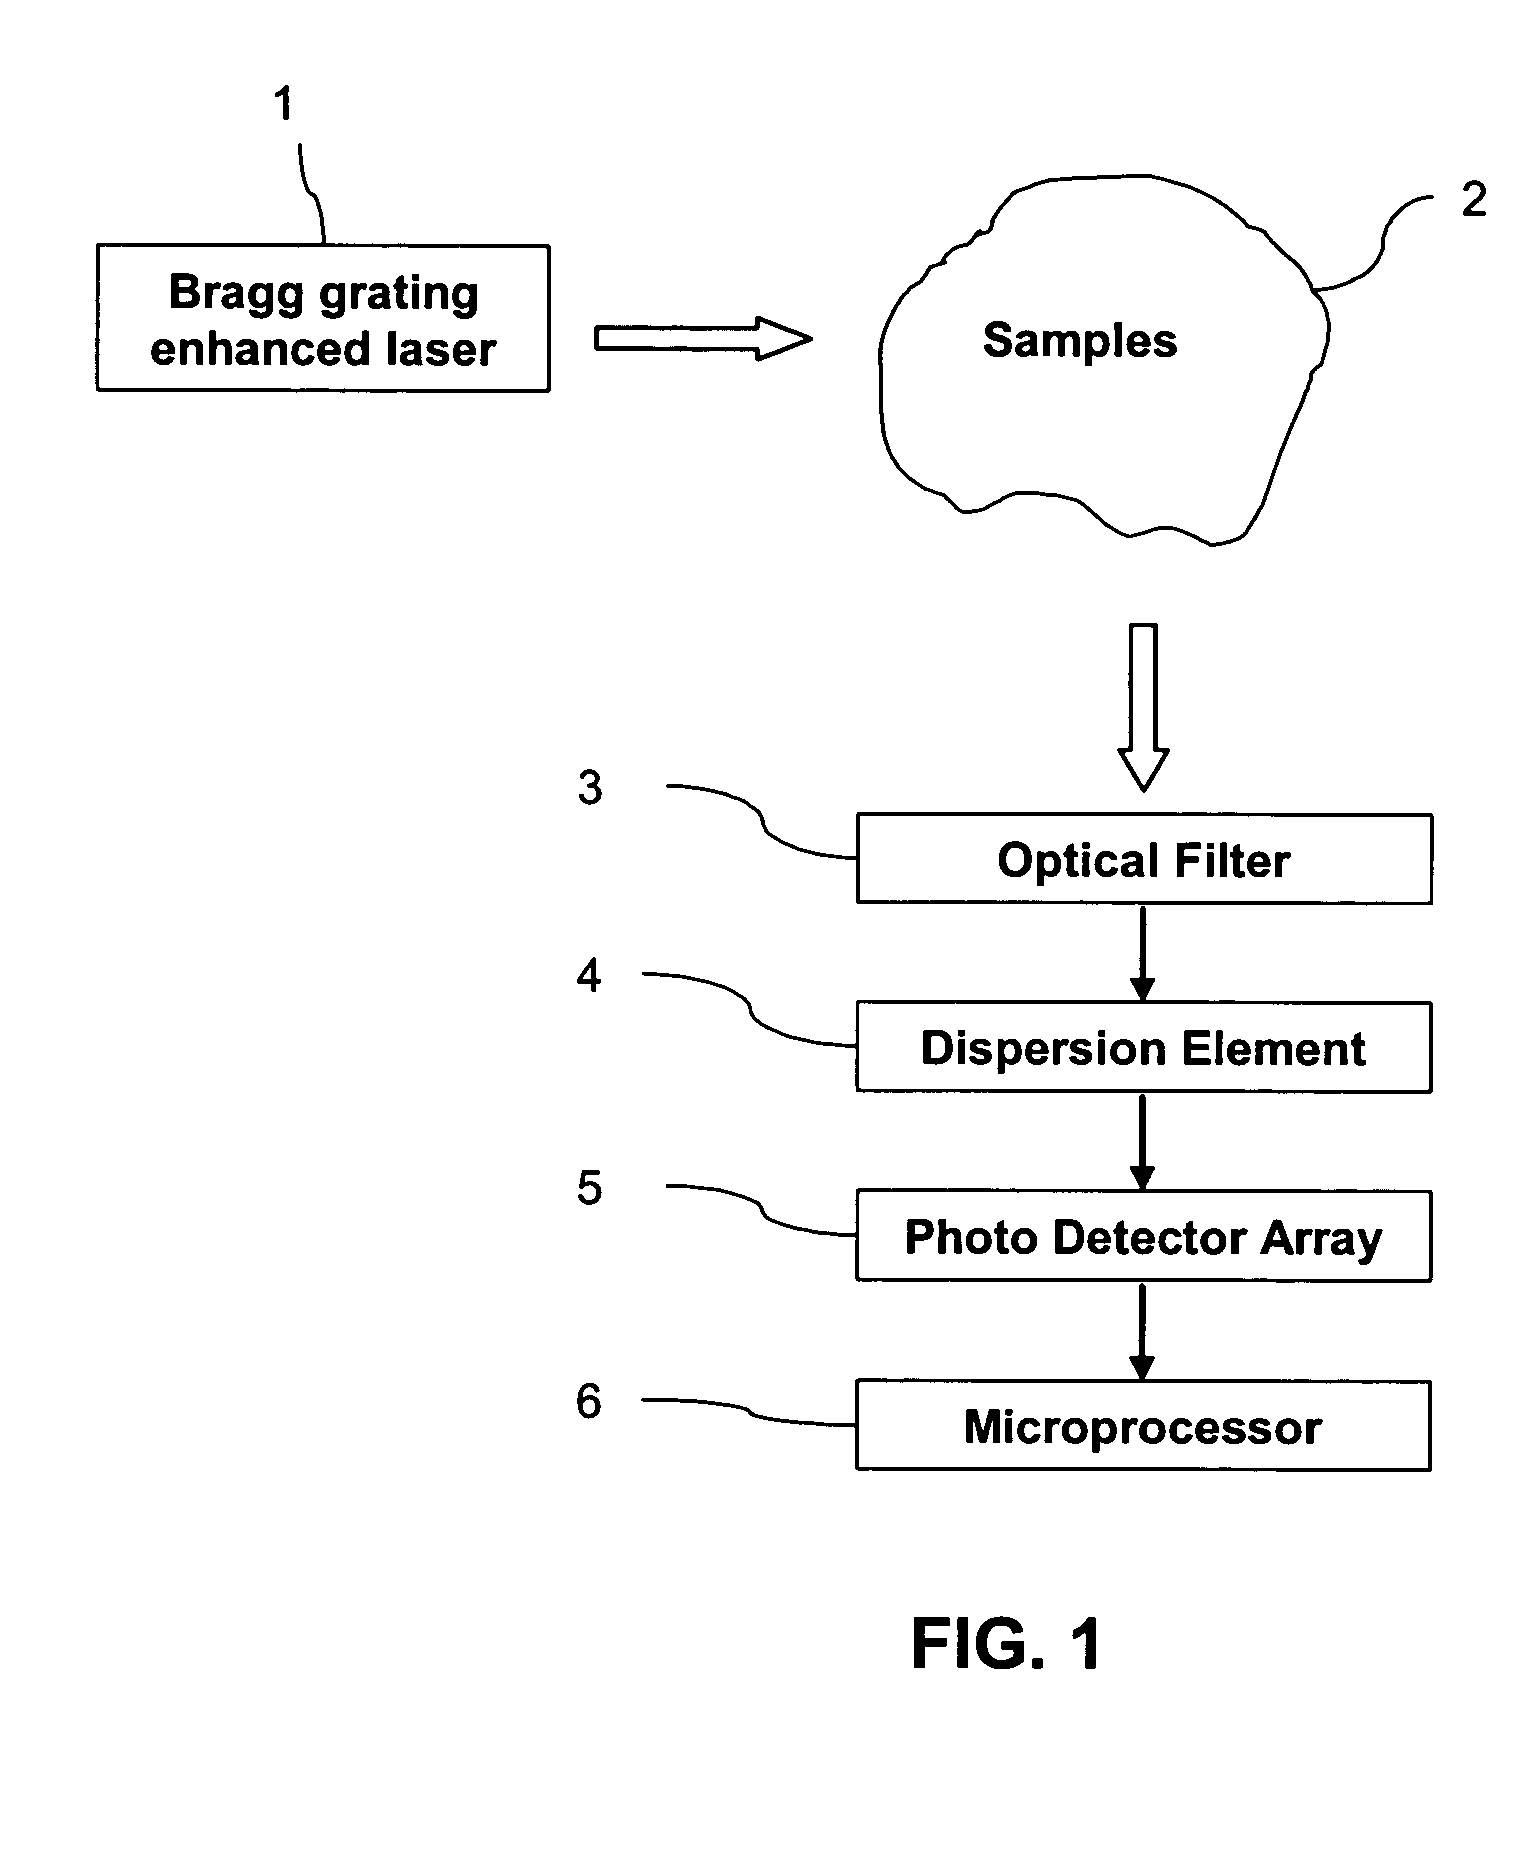 Spectroscopic apparatus using spectrum narrowed and stabilized laser with Bragg grating